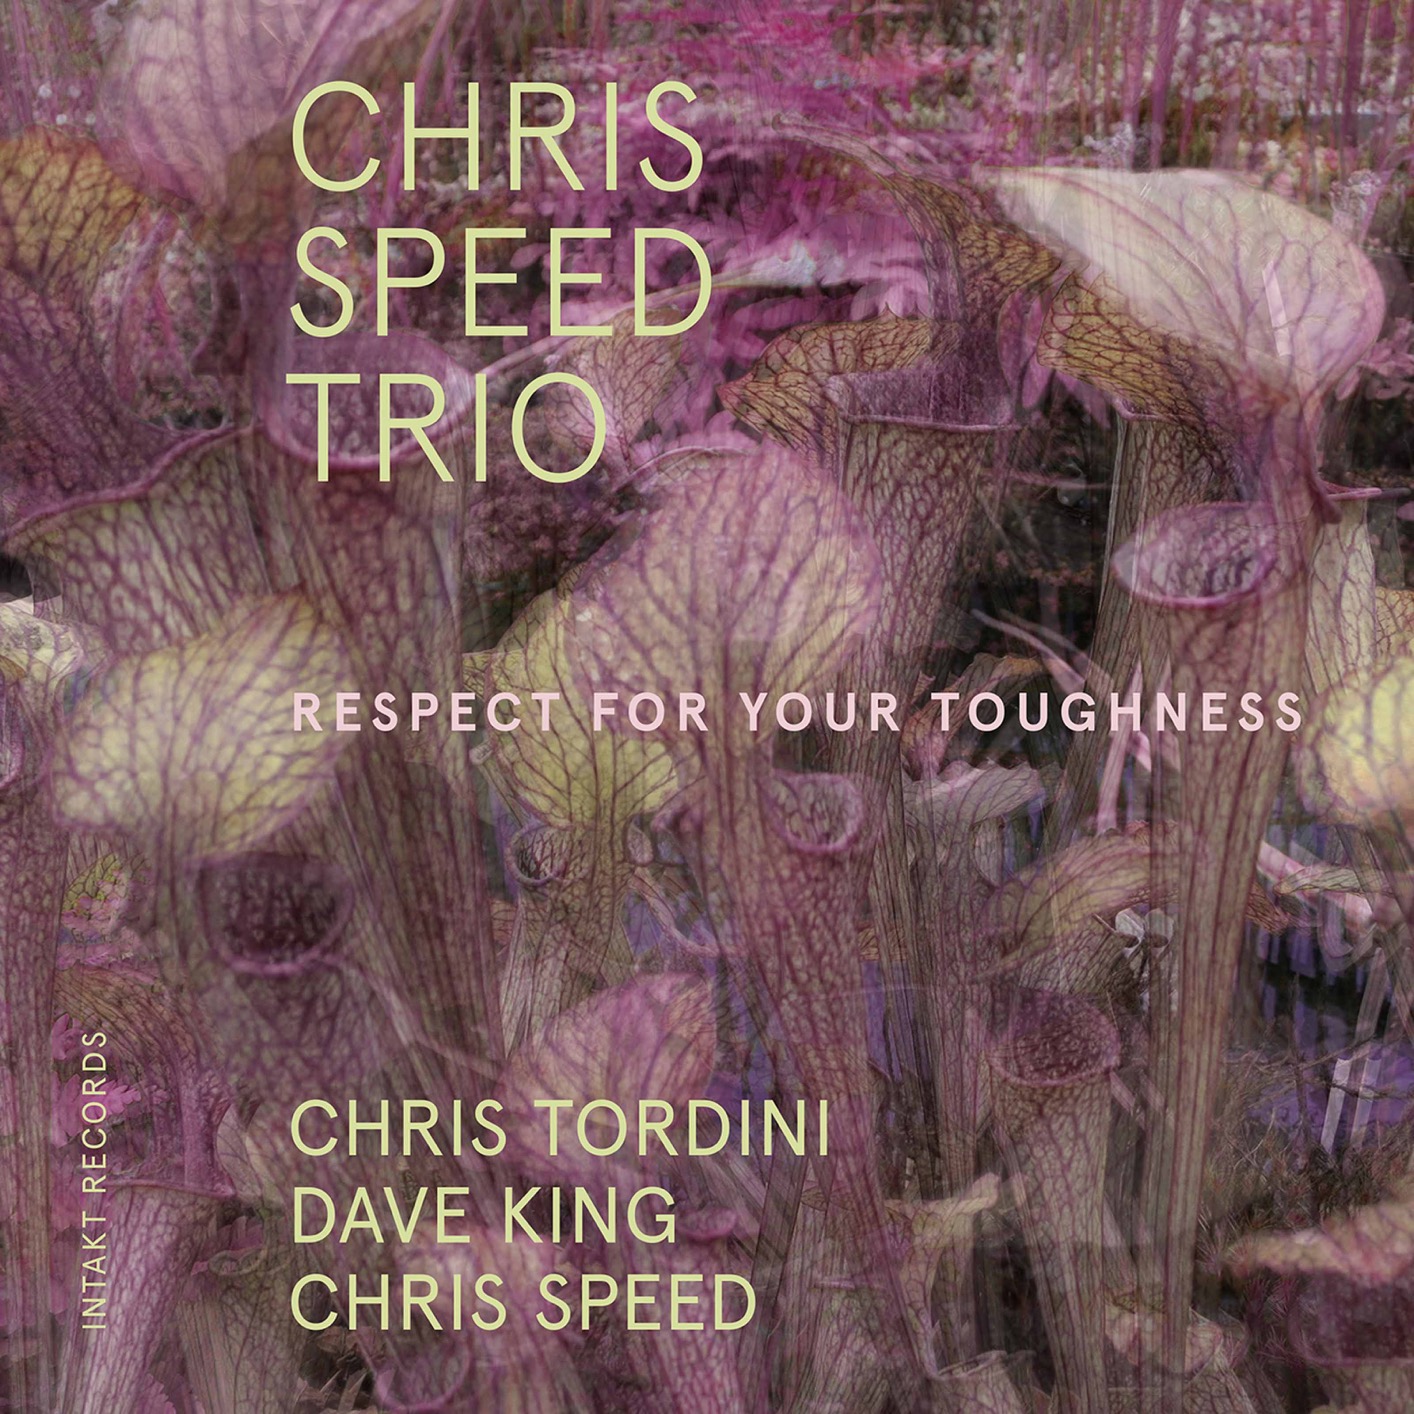 Chris Speed Trio – Respect for Your Toughness (feat. Chris Tordini & Dave King) (2019) [FLAC 24bit/48kHz]